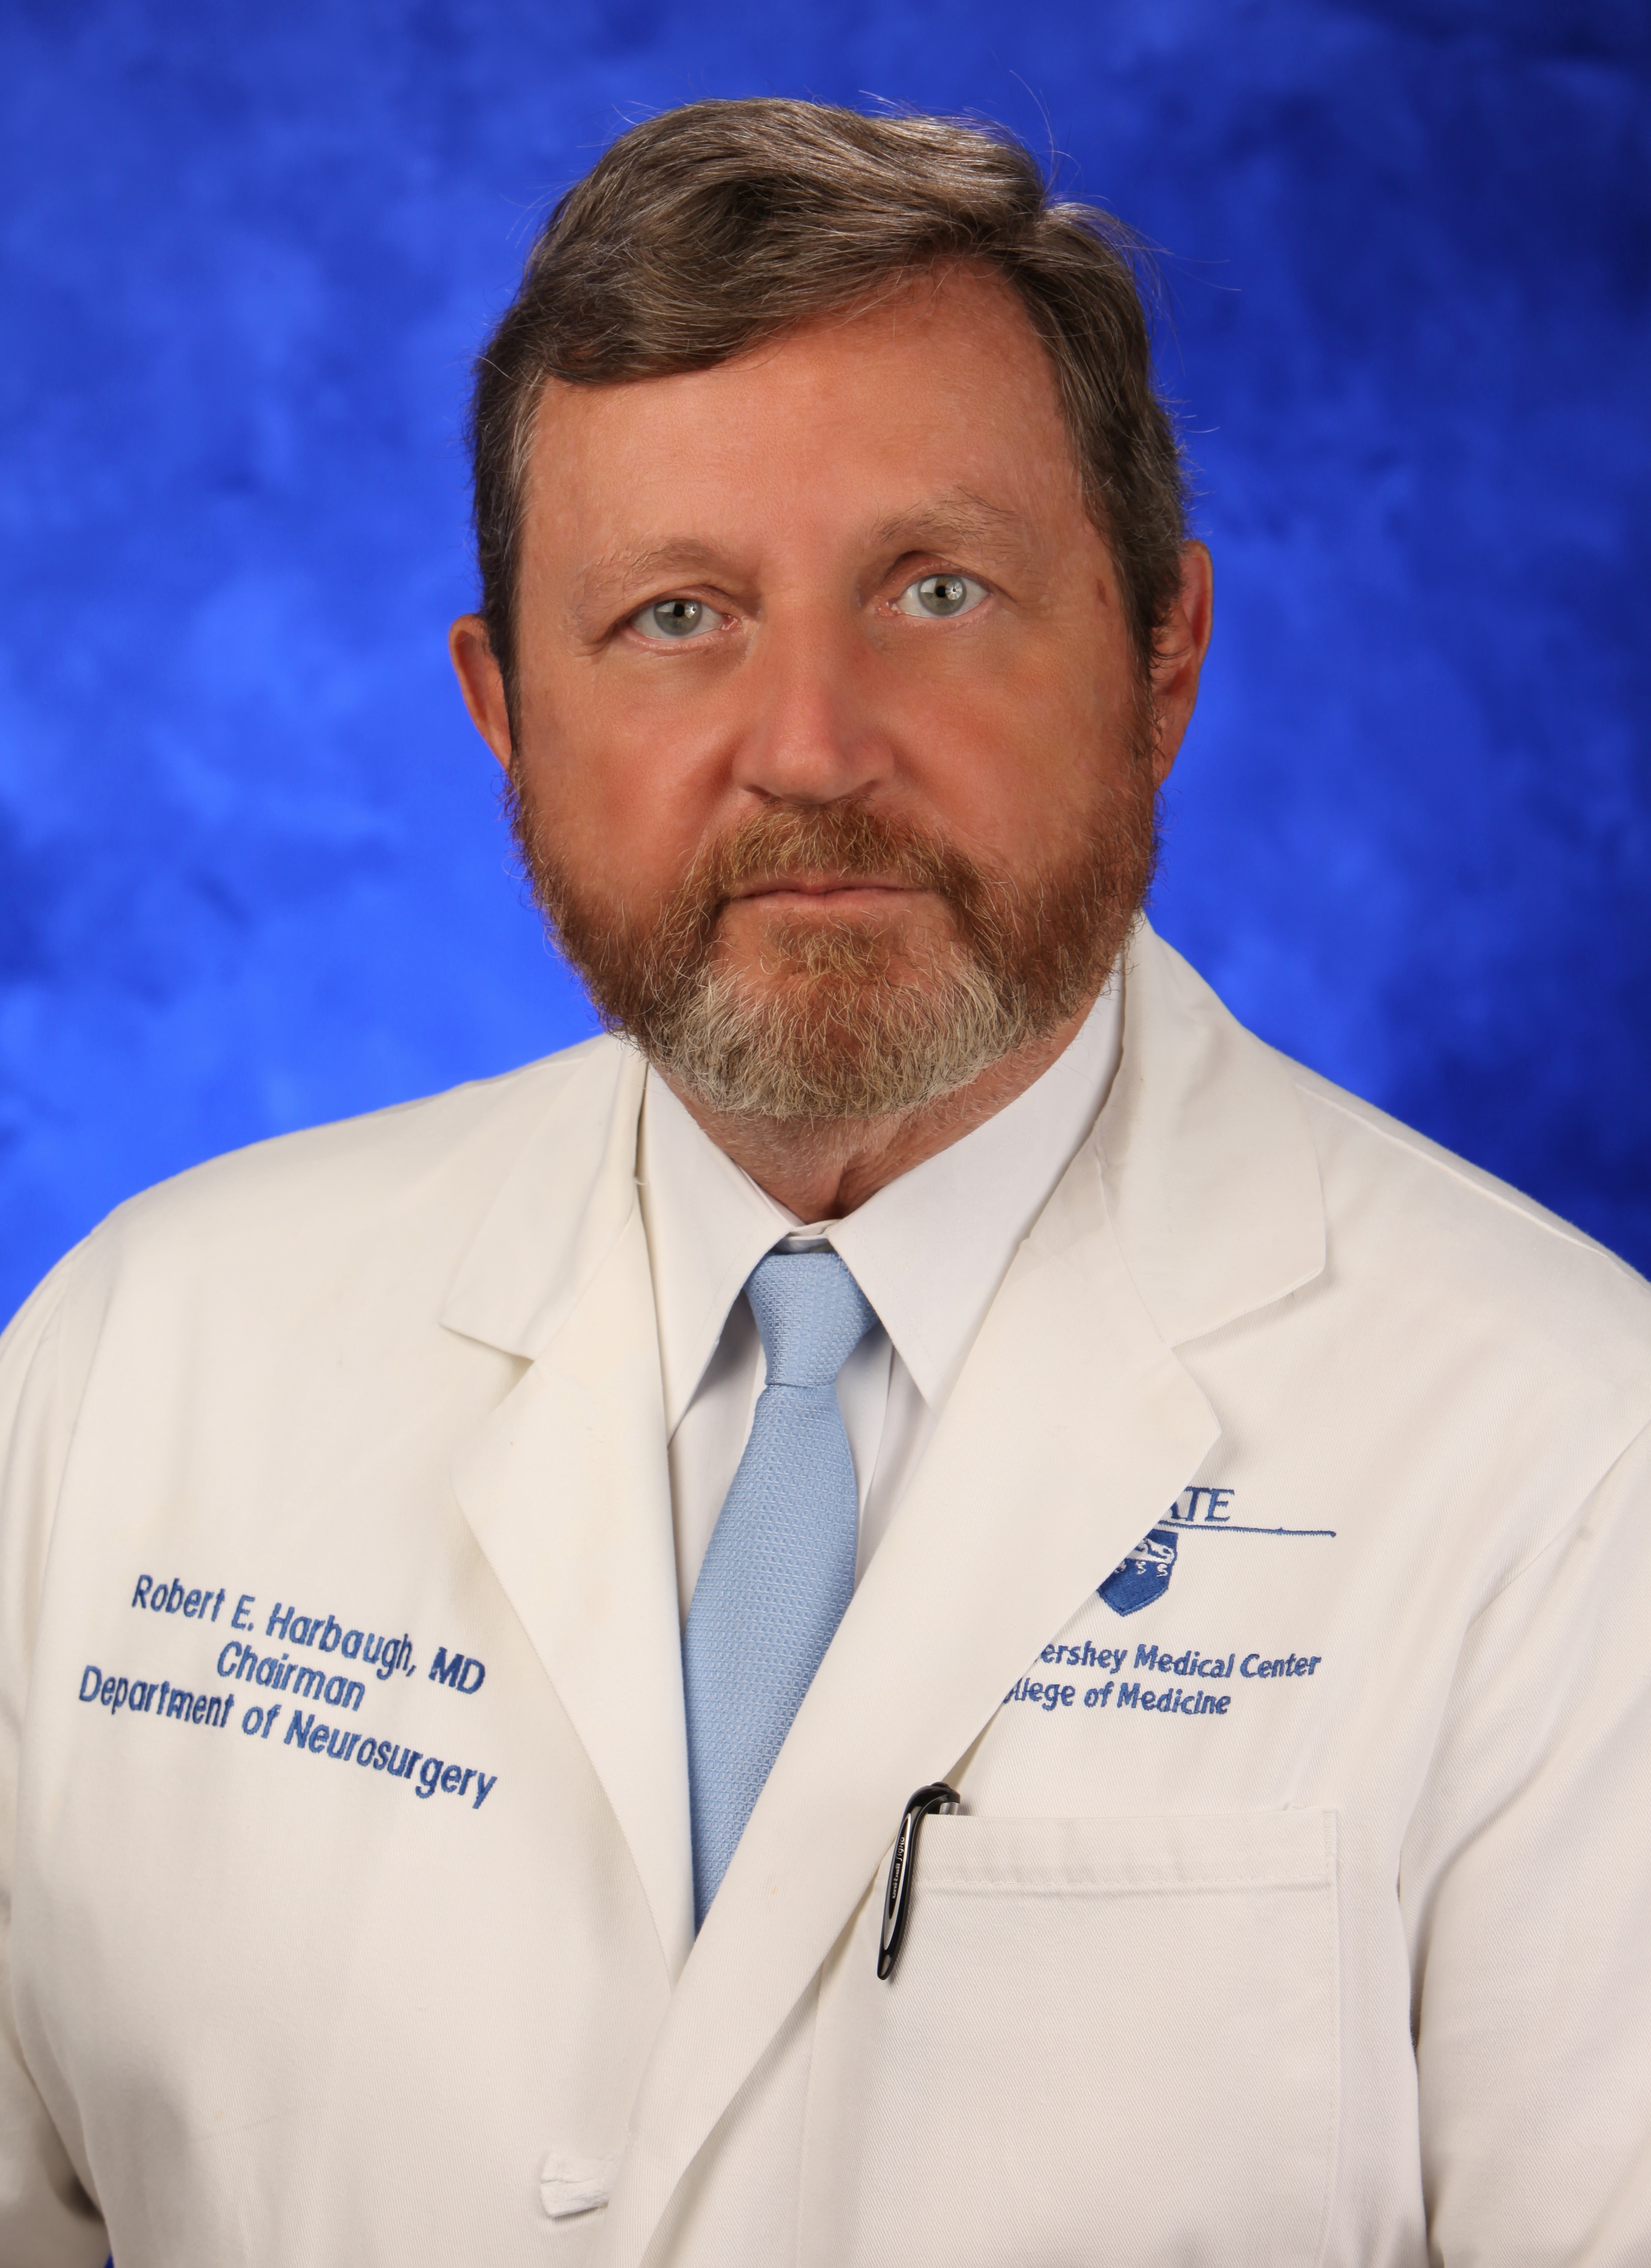 Dr. Robert Harbaugh, chair of the Department of Neurosurgery at Hershey Medical Center and Penn State College of Medicine, is pictured in a head-and-shoulders professional portrait, wearing a medical coat with the medical center and college of medicine’s logos on it.